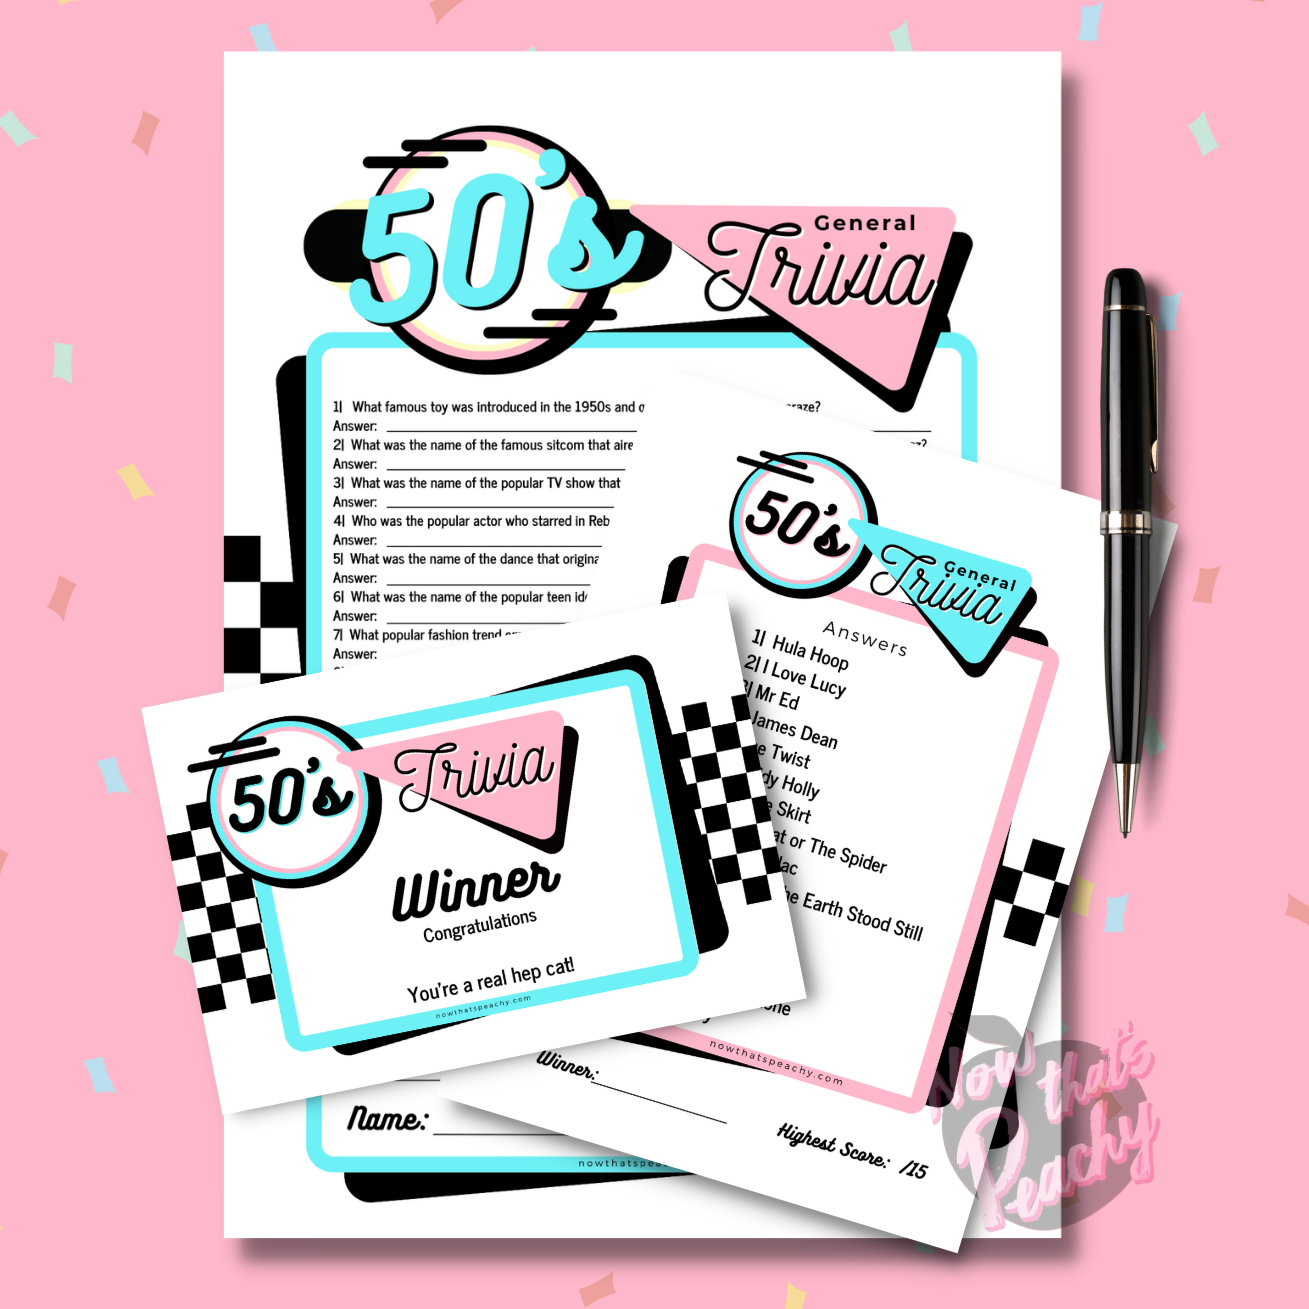 General 1950s Trivia Quiz printable party game, instant digital download sock hop soda diner rocknroll rockabilly fifties themed parties events. fun easy. retro pink aqua blue nostalgic design style vibe, all round general questions answers awards to print off and play nowthatspeachy 